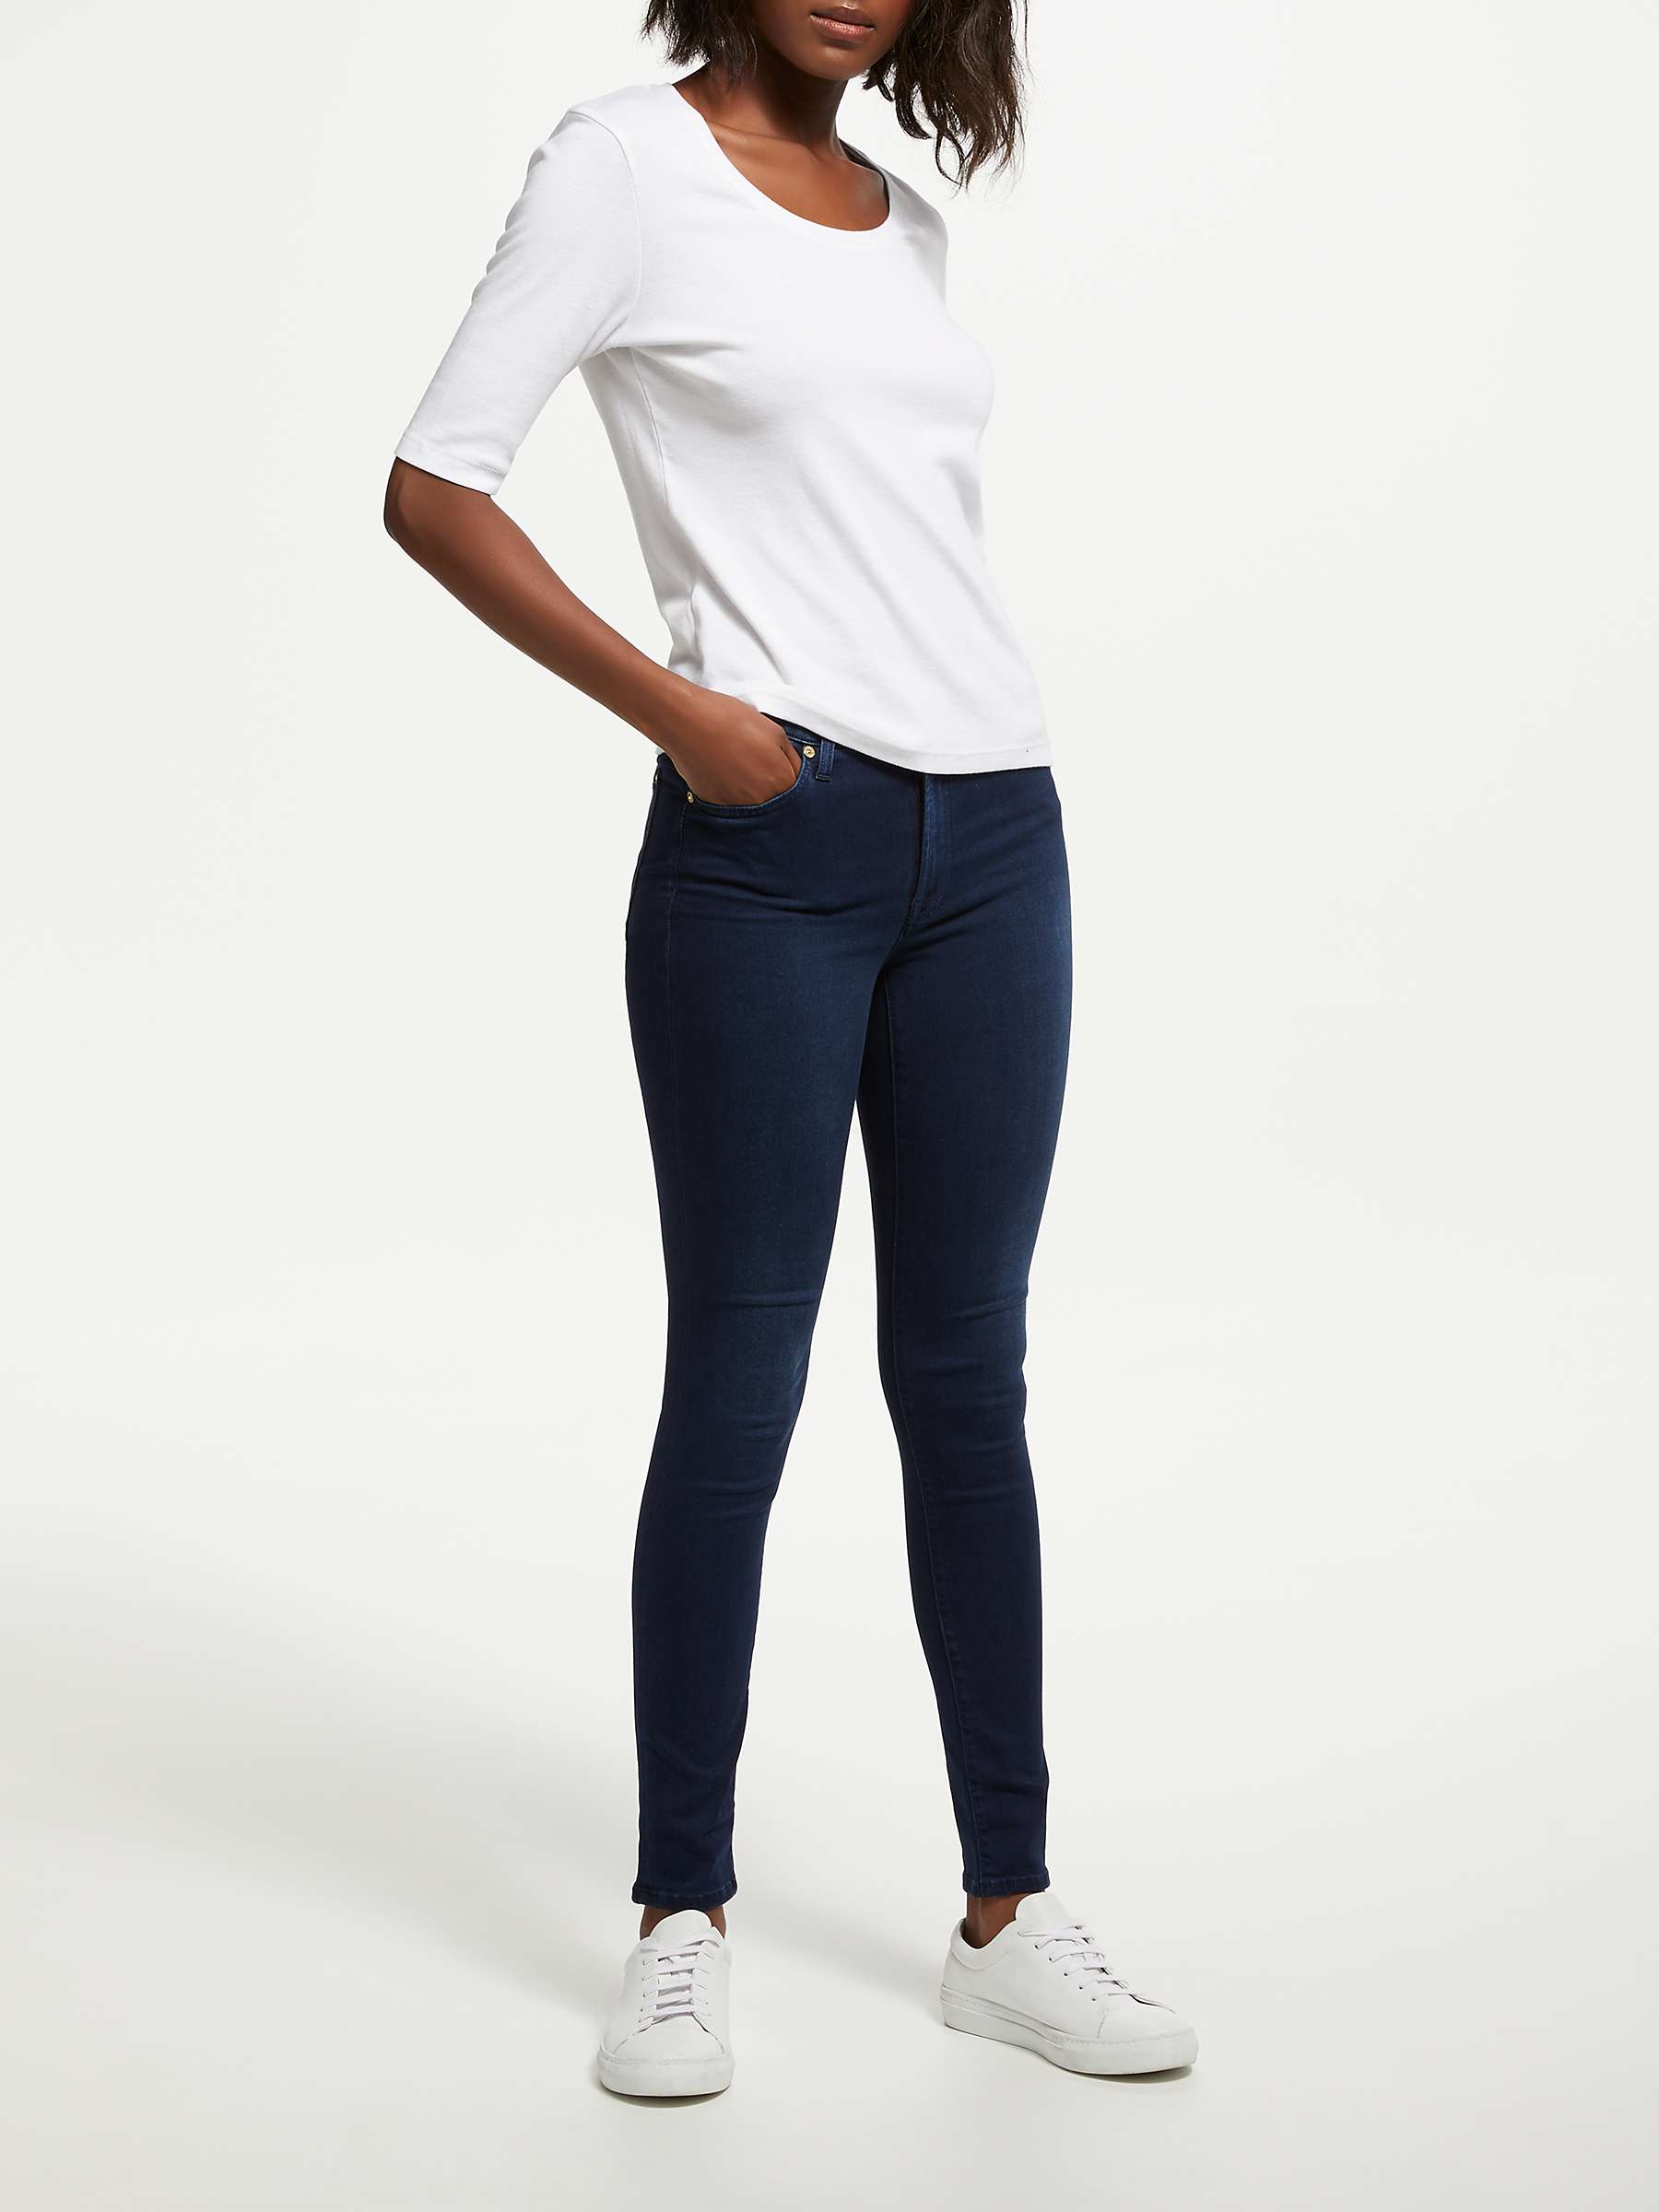 Buy 7 For All Mankind Slim Illusion Luxe Jeans, Rich Indigo Online at johnlewis.com